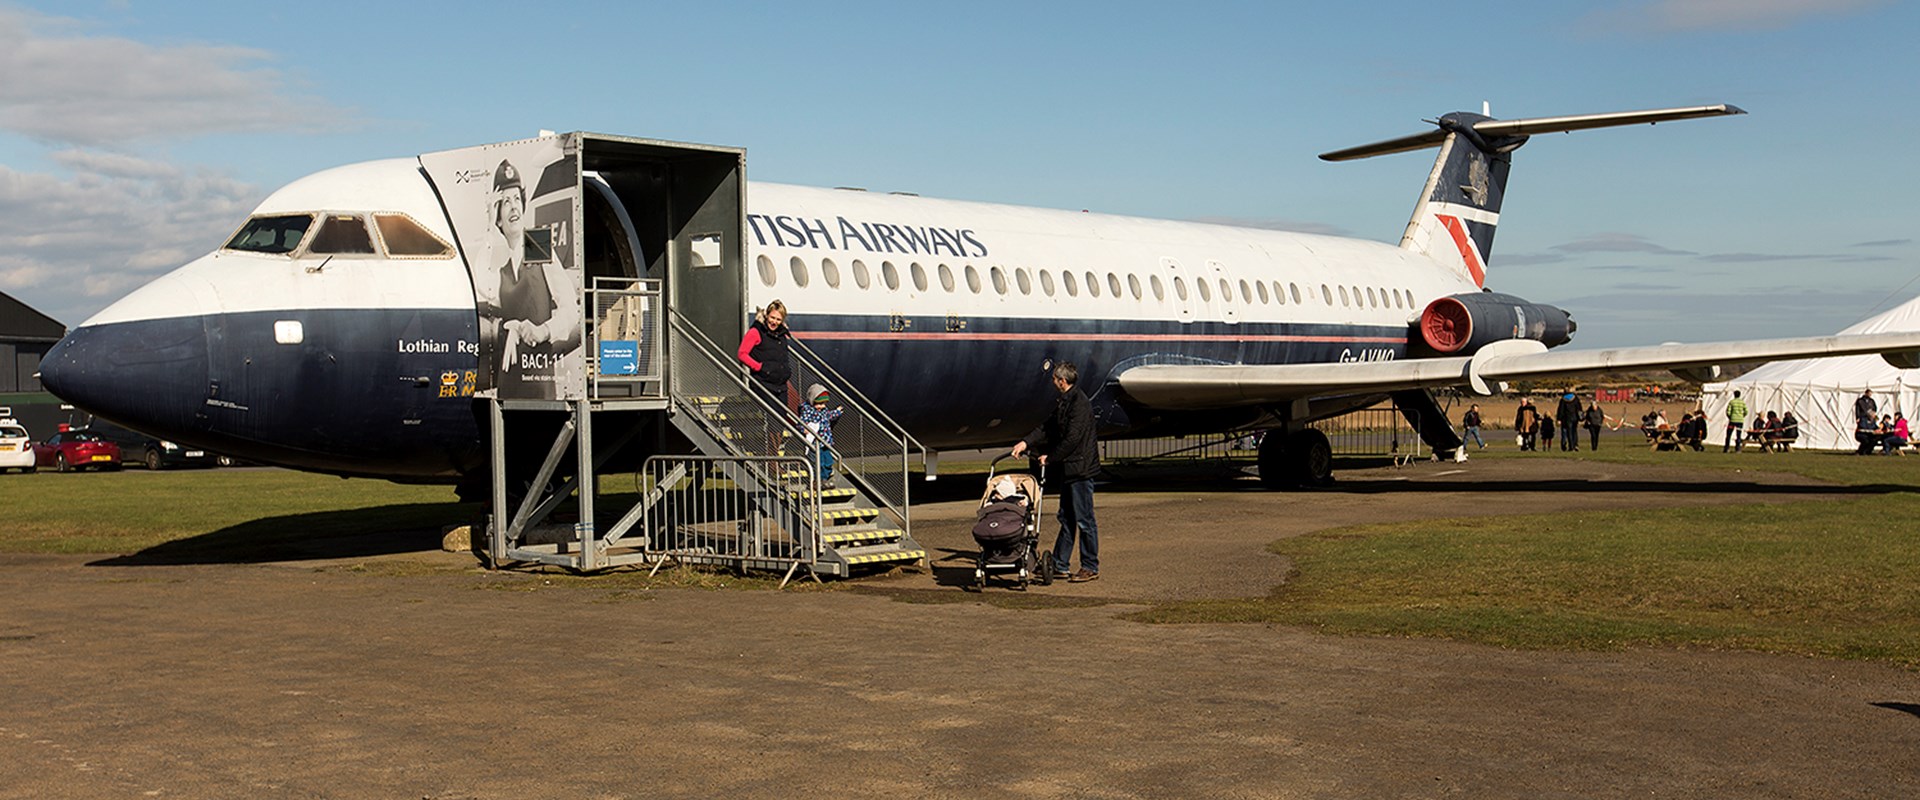 A family walking down the steps of a plane in an airfield